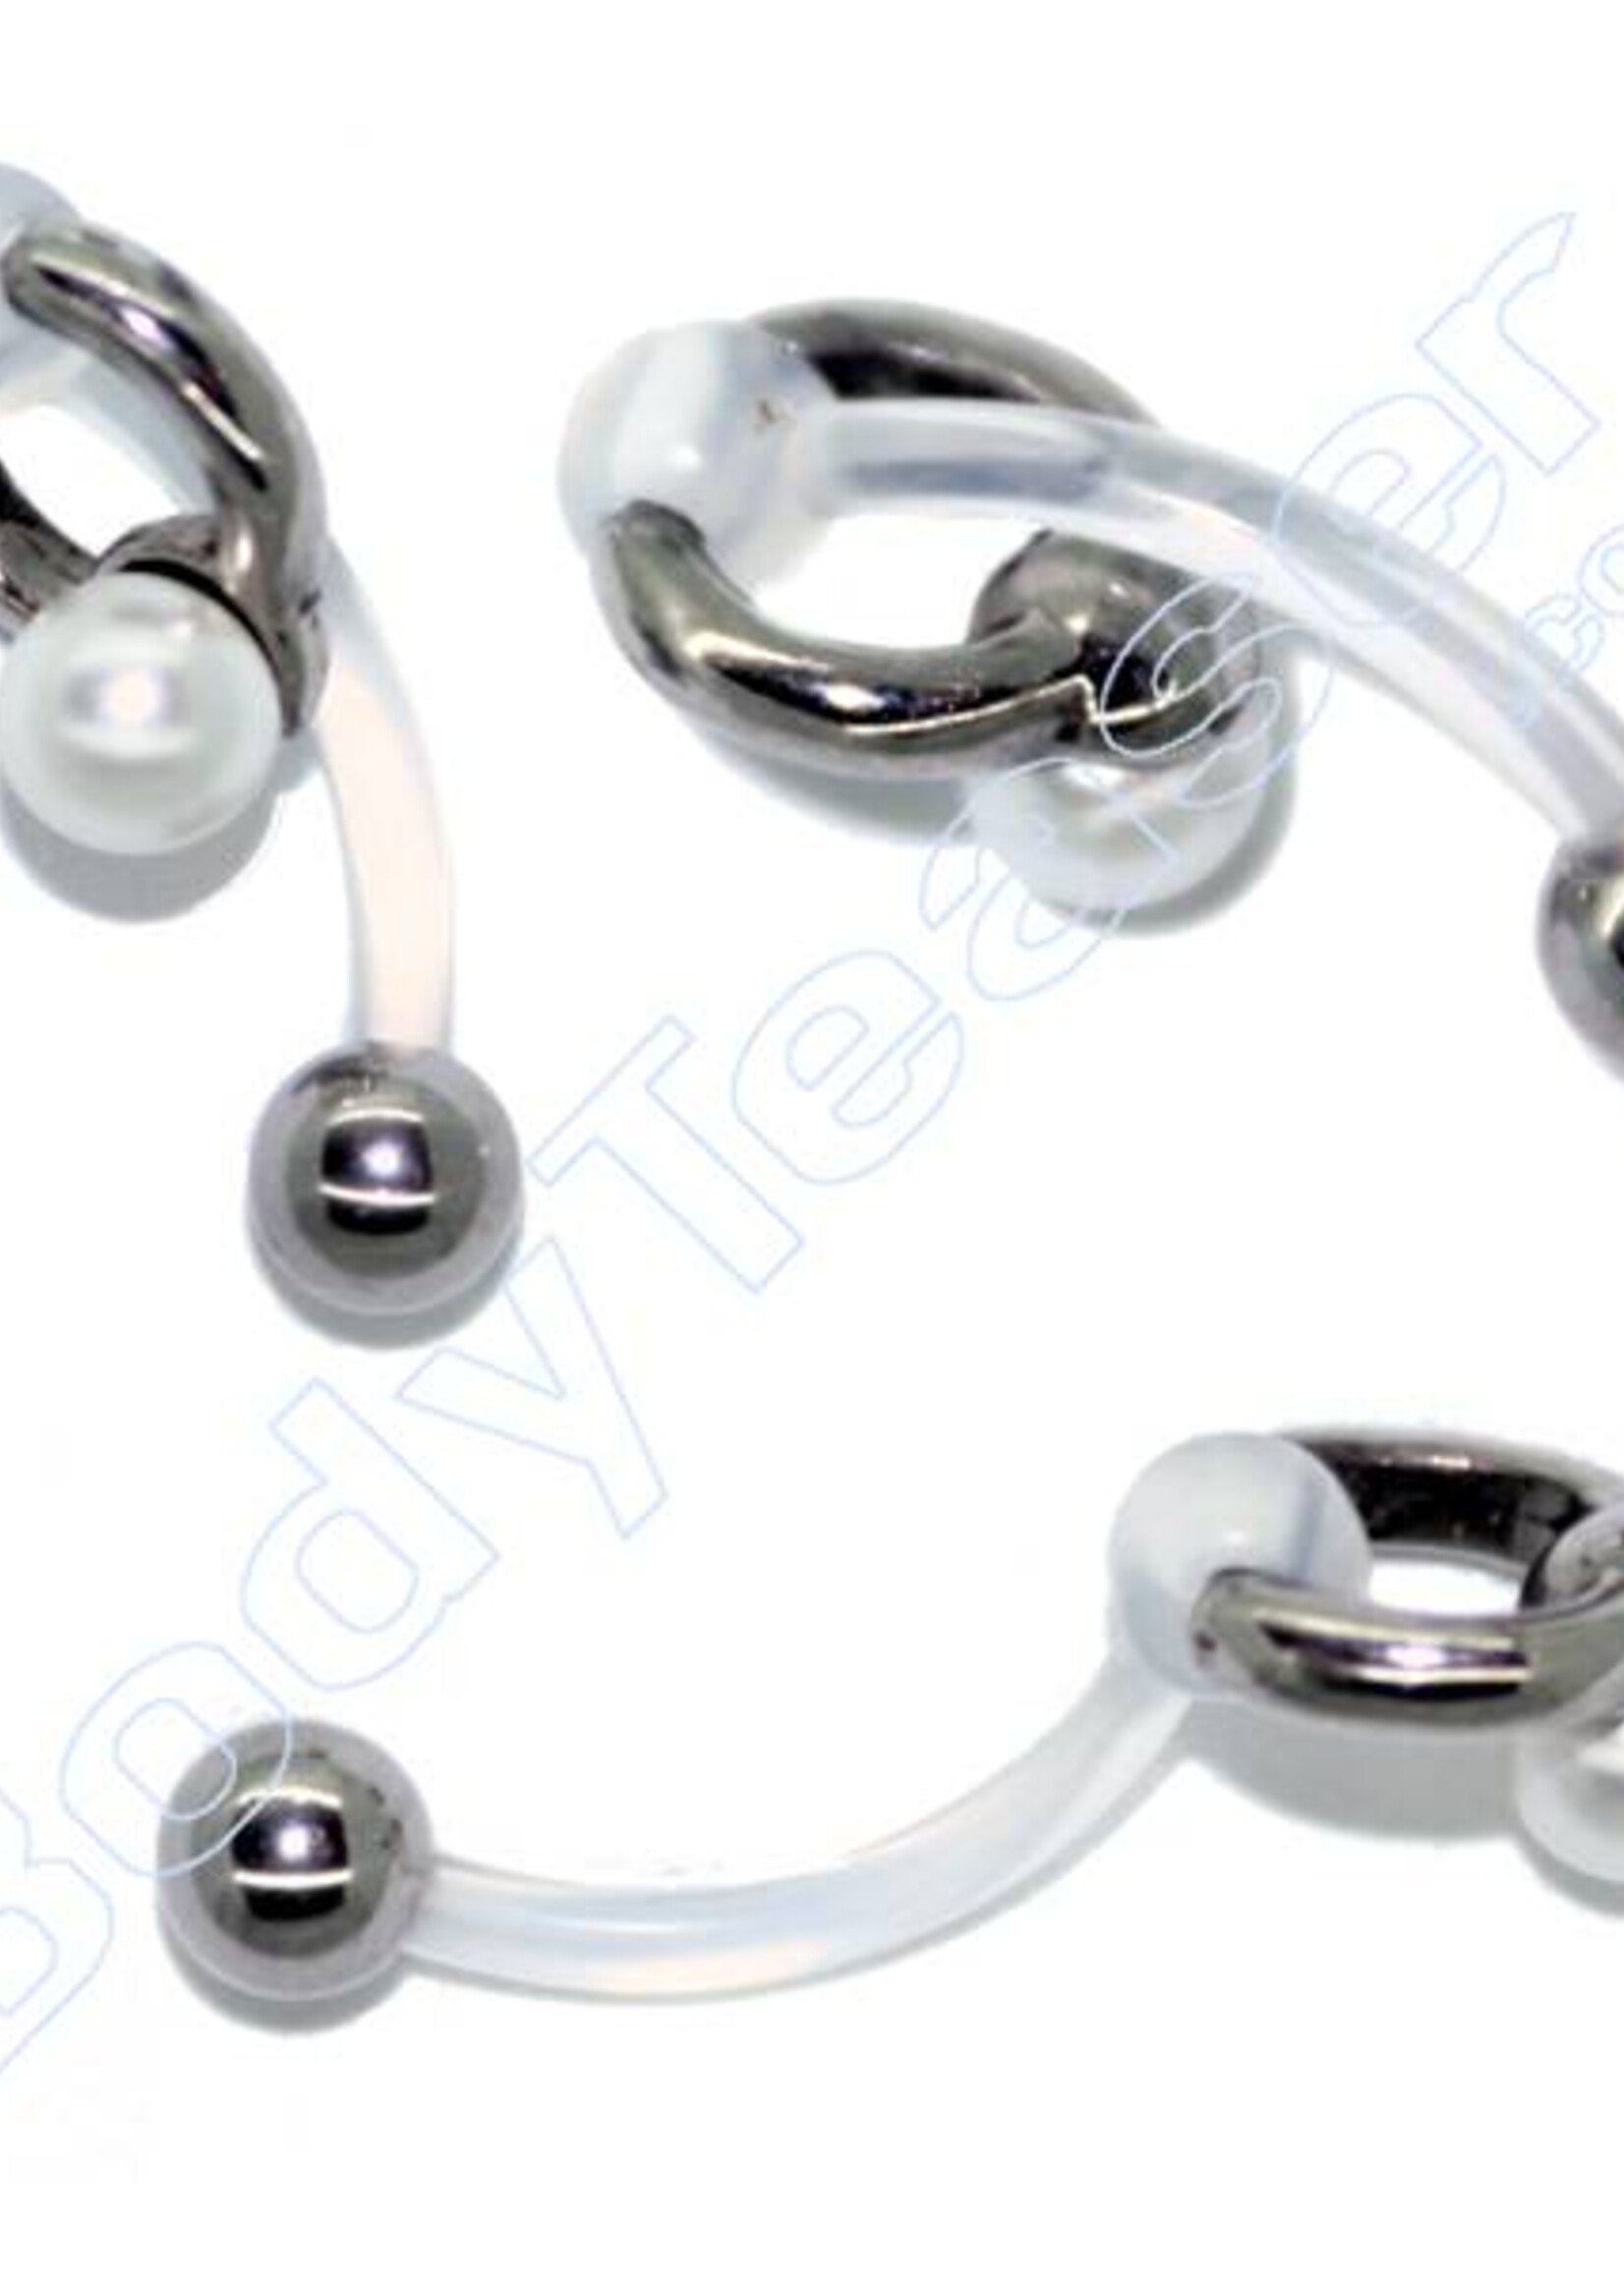 Intimate Piercing Jewelery Pearl, Surgical Steel